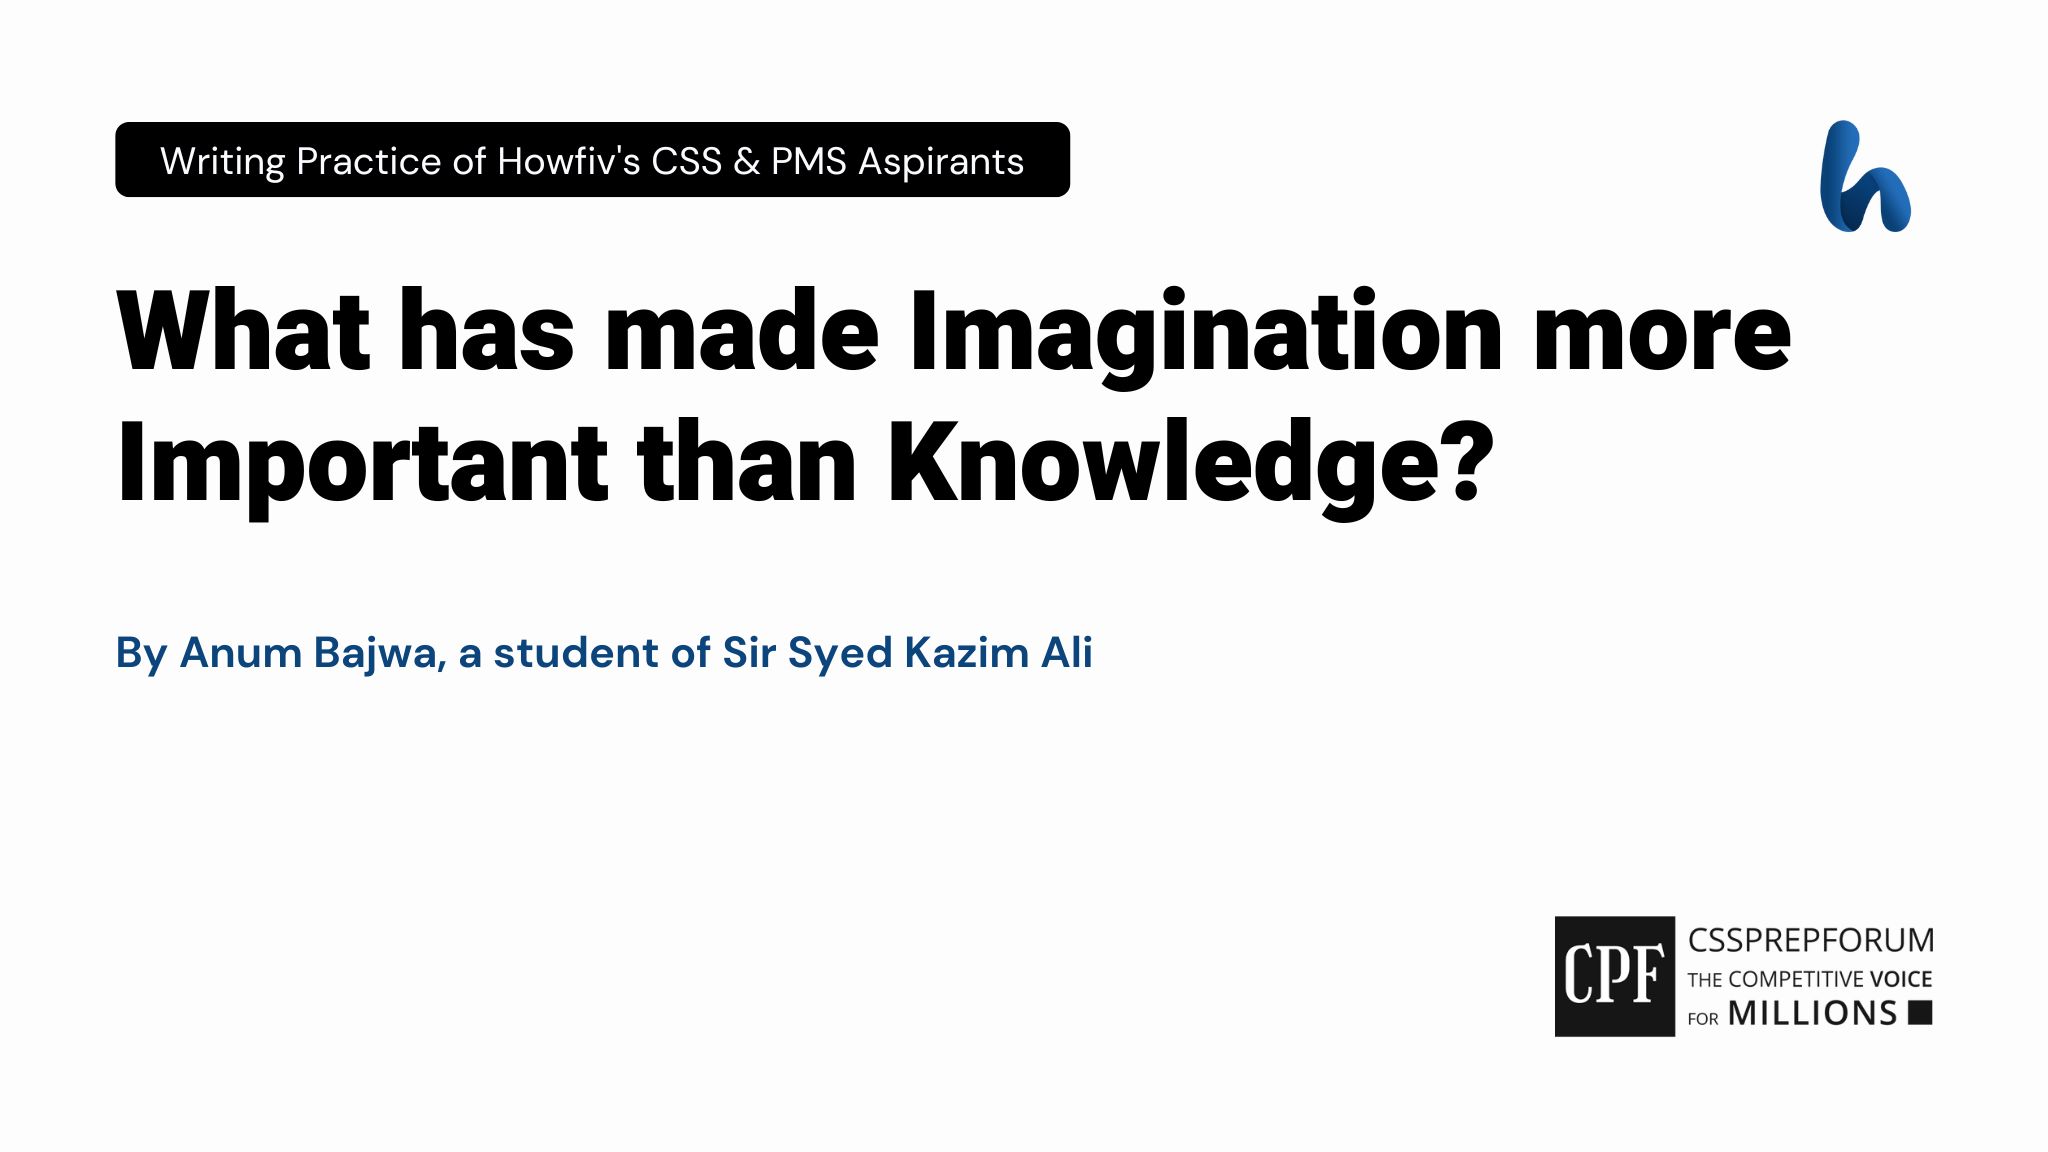 Imagination: More Important than Knowledge By Anum Bajwa